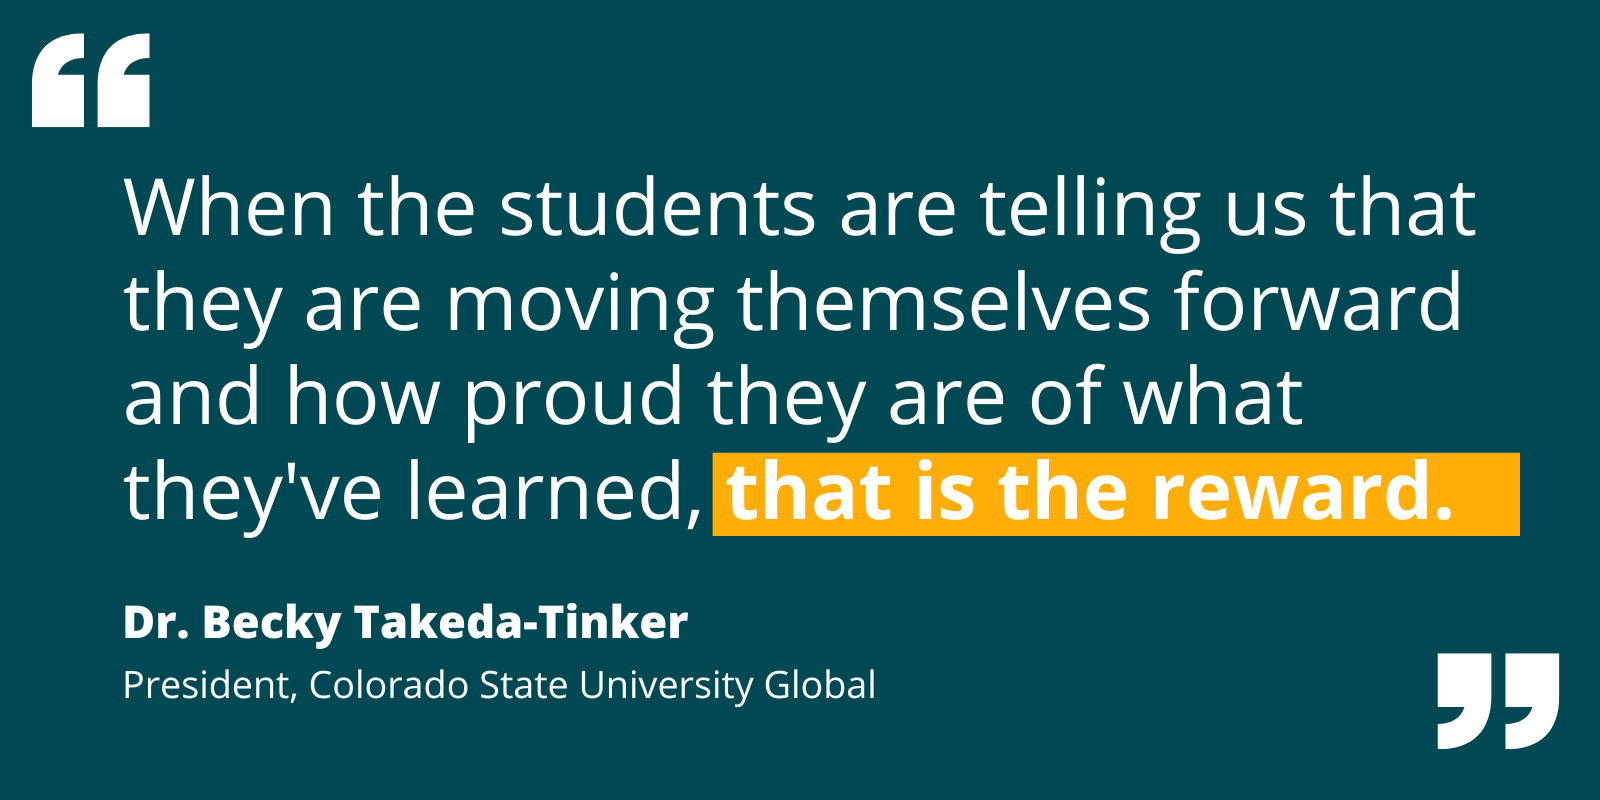 Quote by Becky Takeda-Tinker re: how student progress and pride is an educator’s ultimate reward.